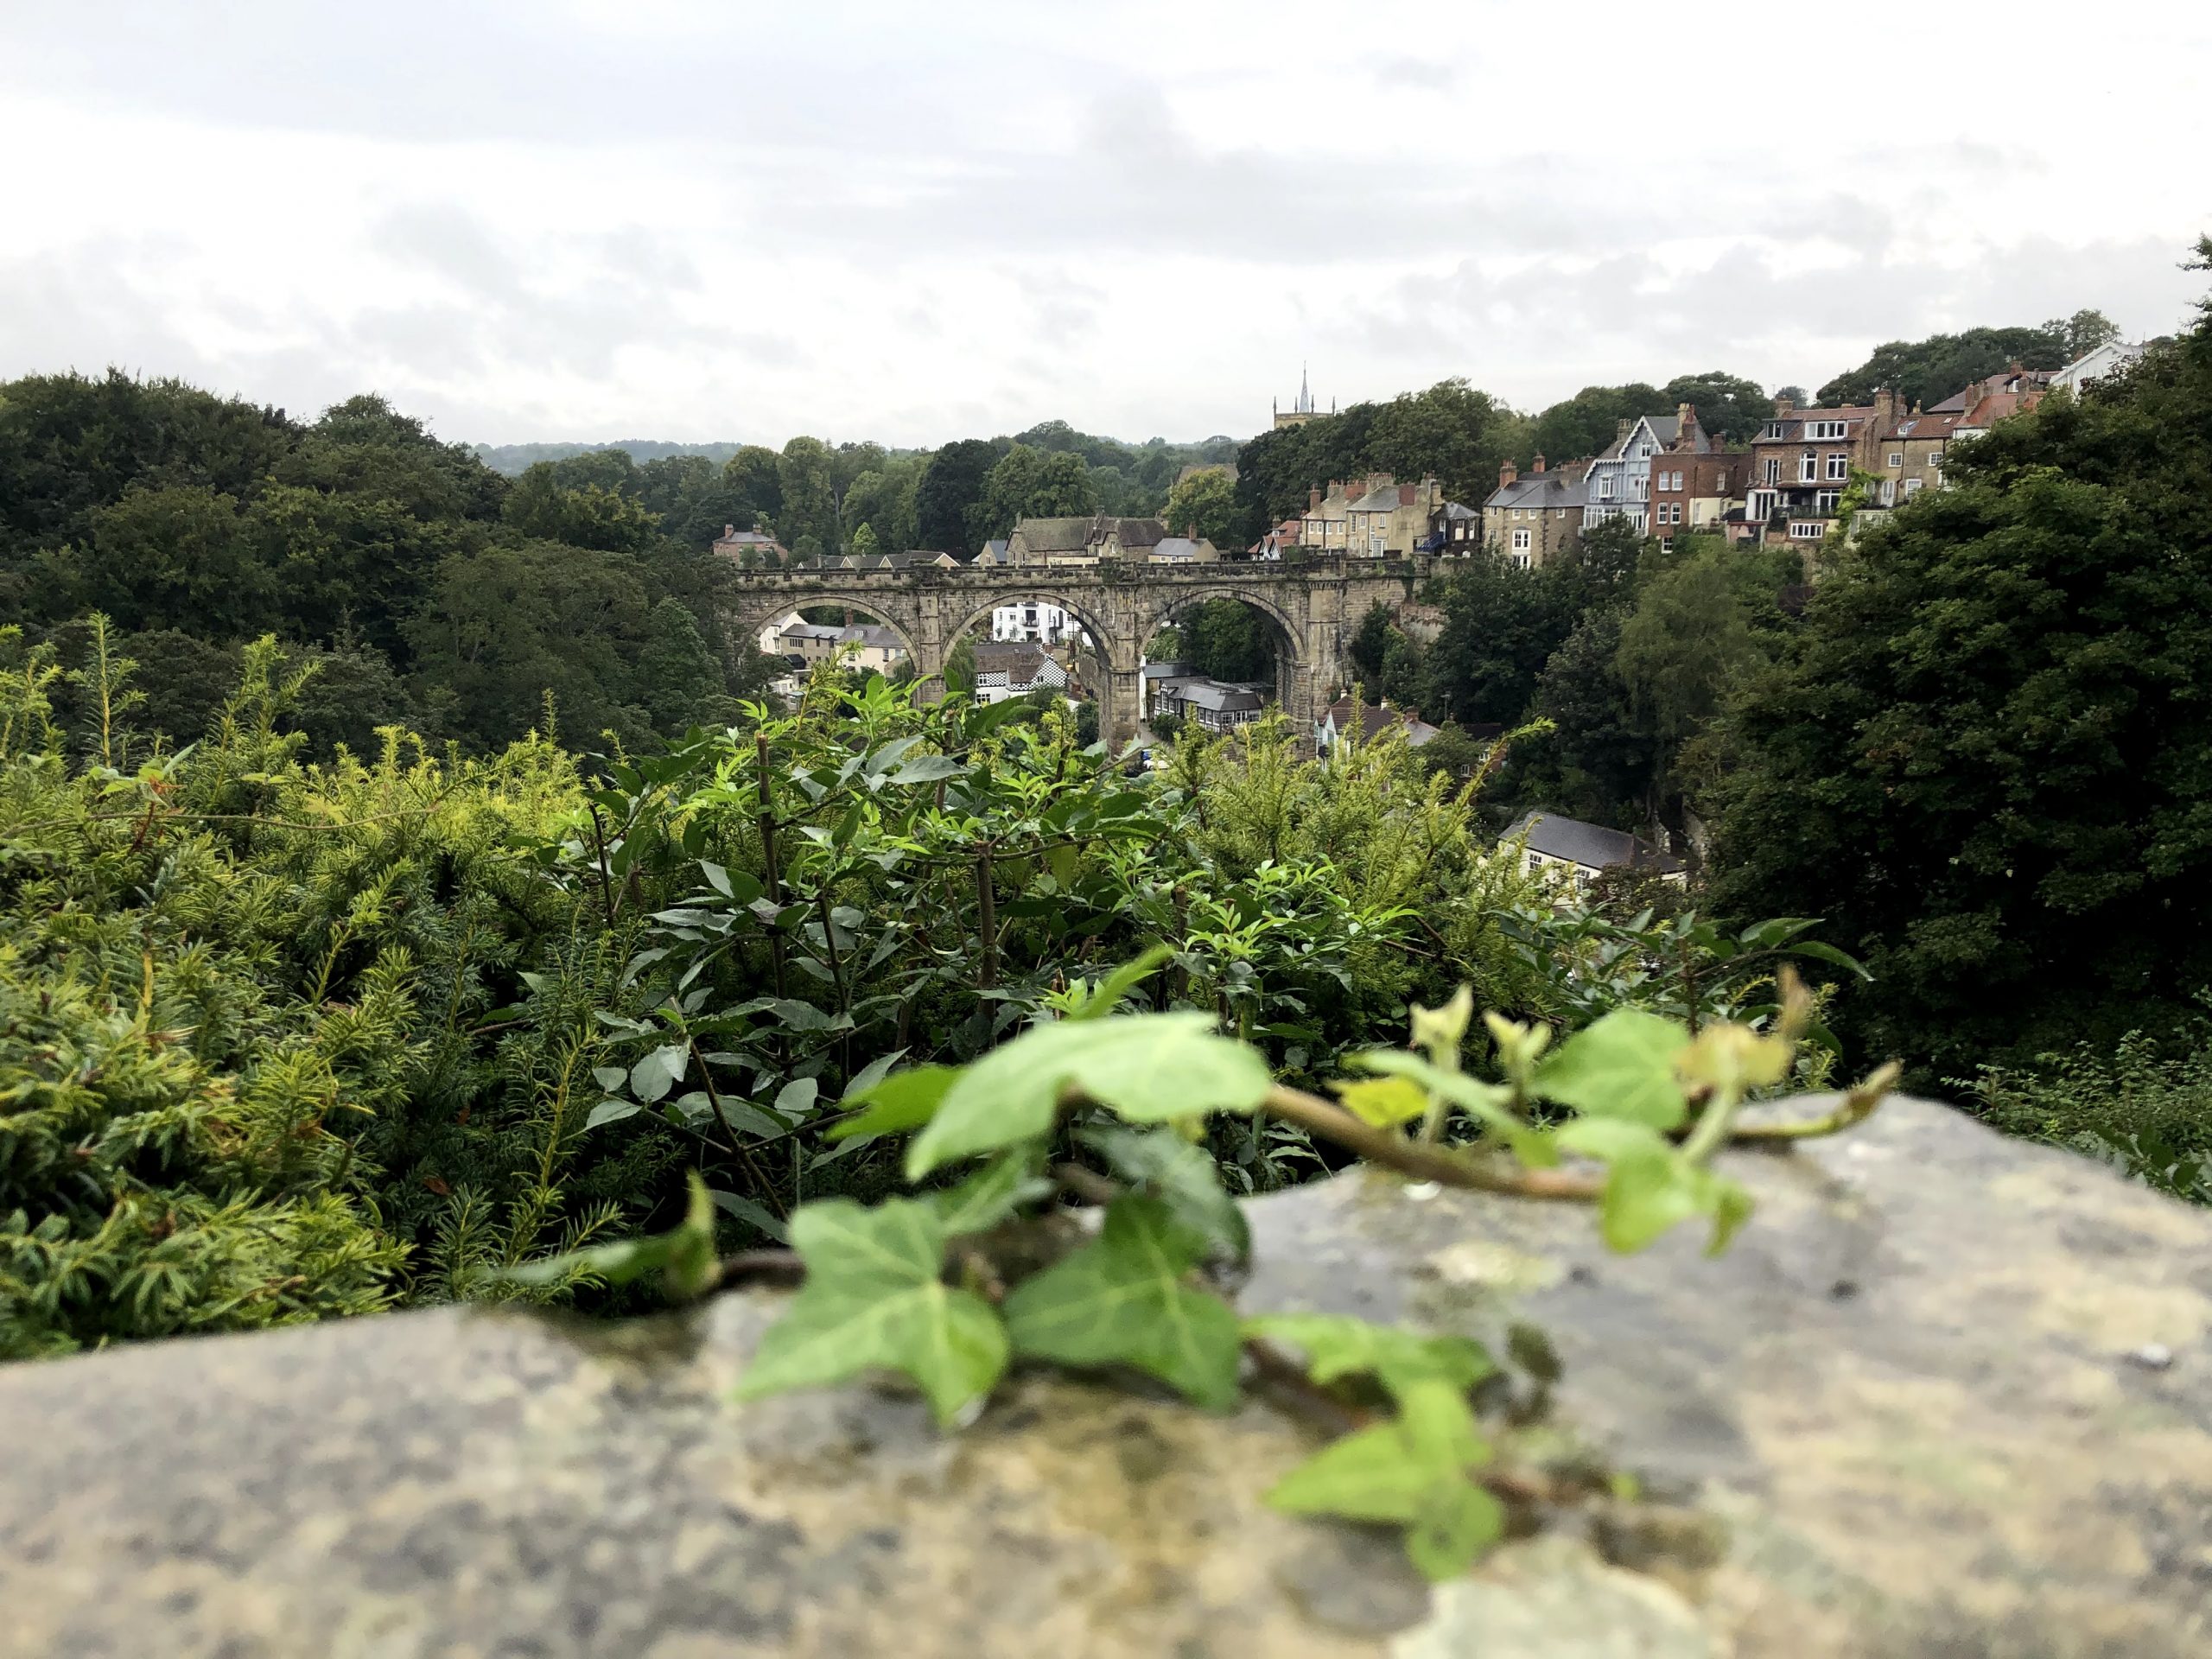 Things to do in Knaresborough - stunning viaduct vista point from the castle grounds